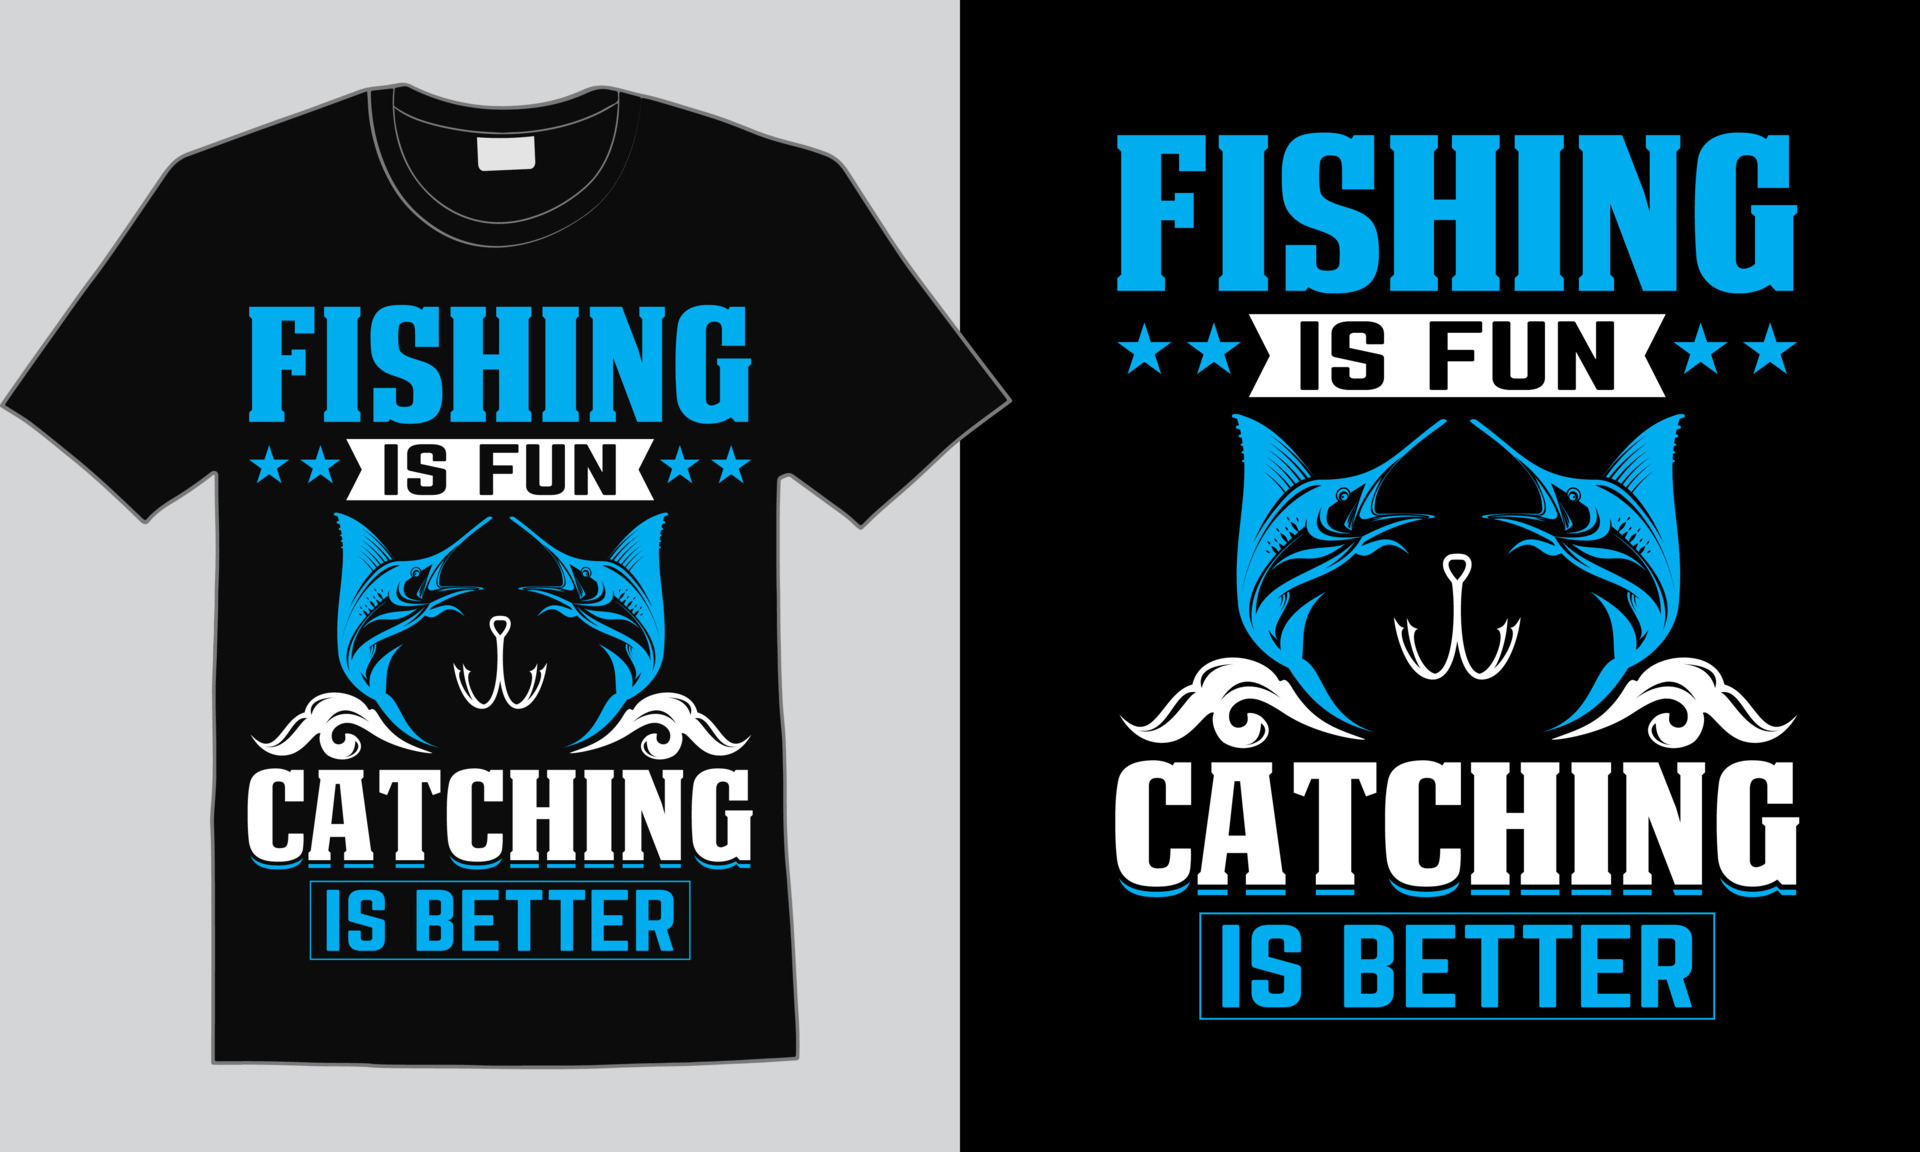 https://static.vecteezy.com/system/resources/previews/010/831/744/original/fishing-t-shirt-design-quotes-fish-tee-free-vector.jpg